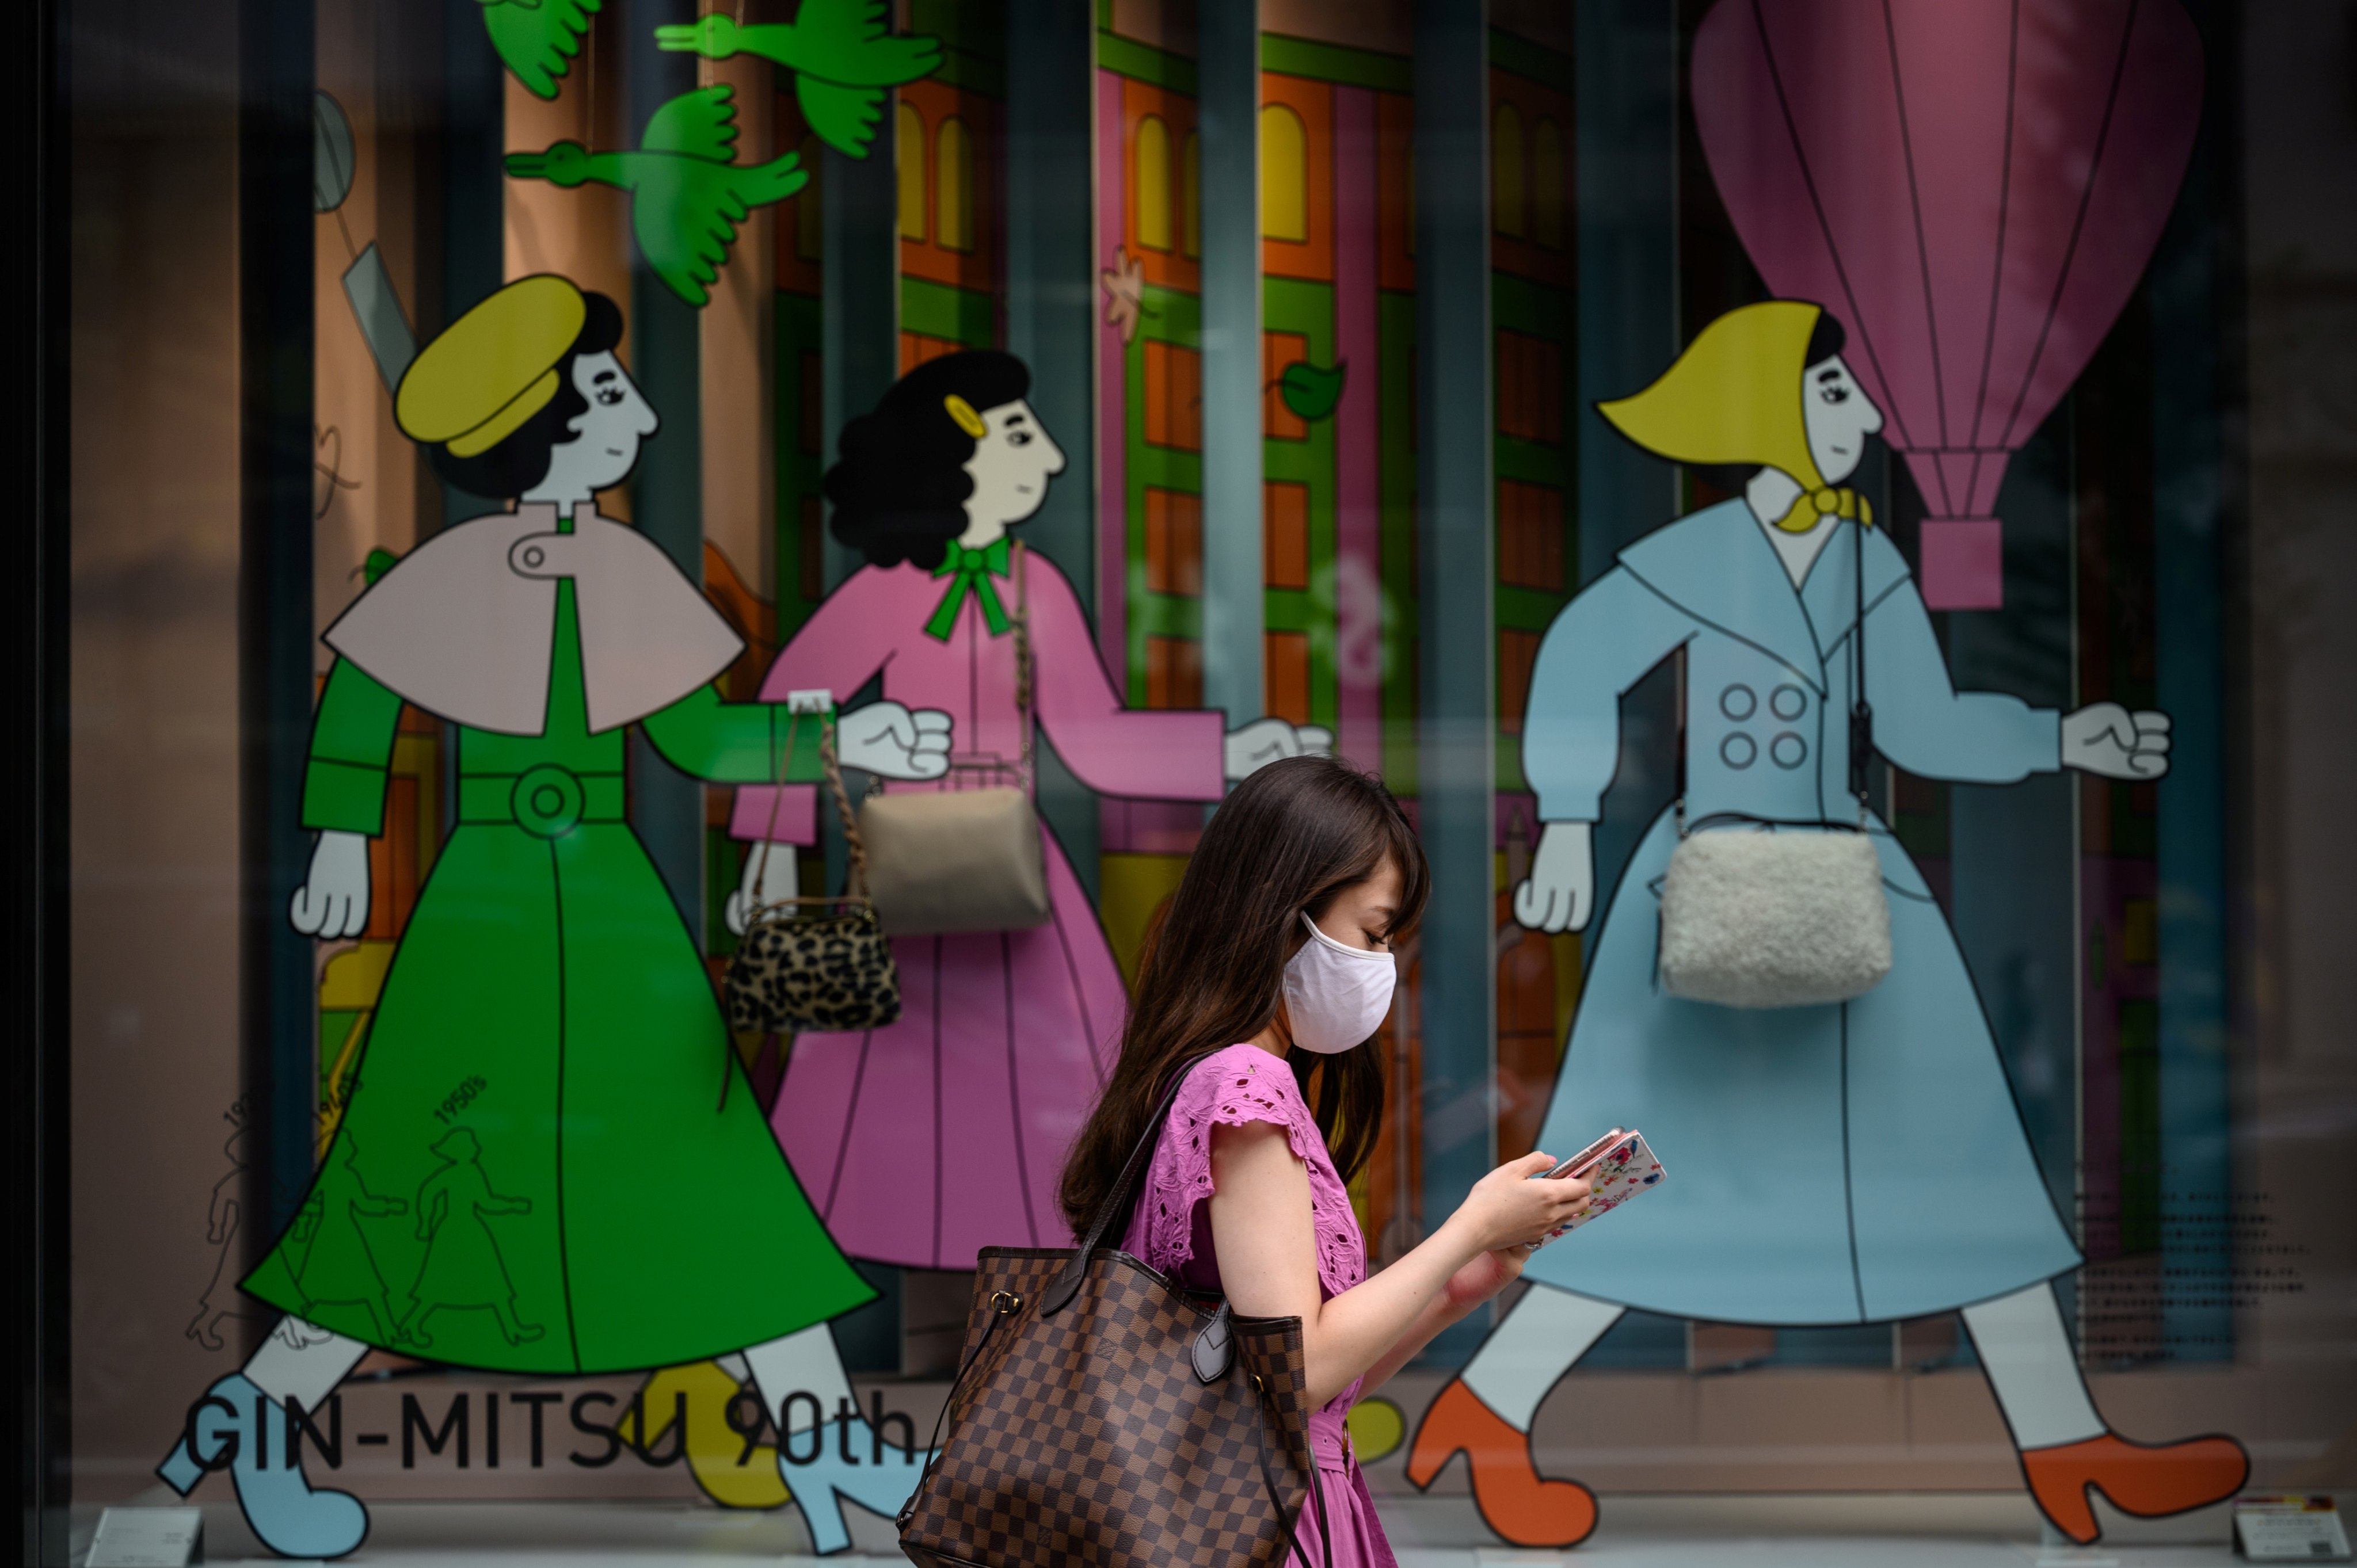 A woman walks past a mural in Tokyo. Japan has the most pronounced gender gap among the OECD countries, a World Bank study has shown. Photo: AFP via Getty Images